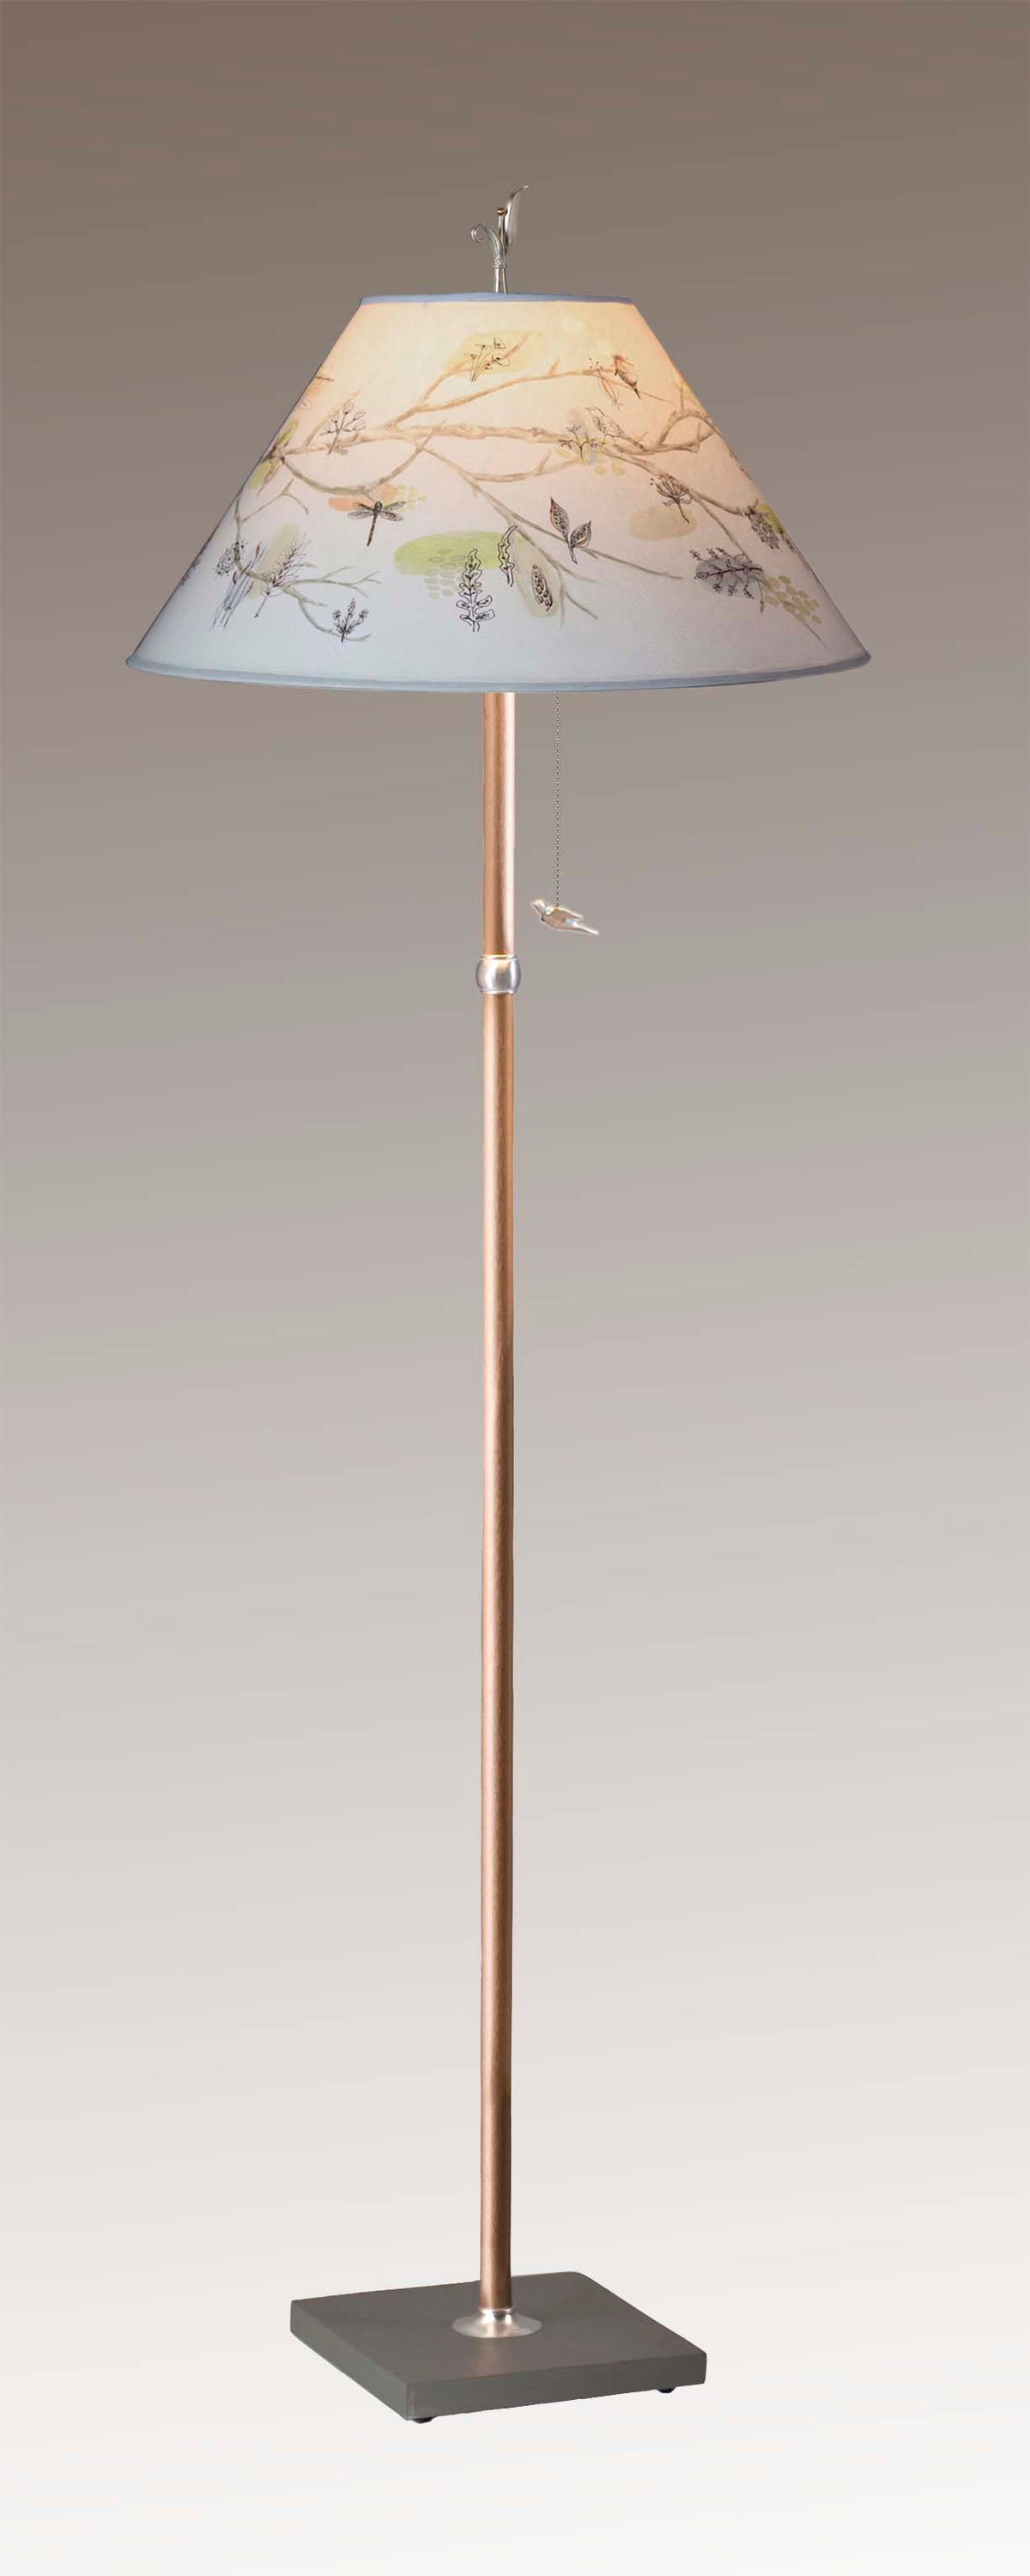 Janna Ugone &amp; Co Floor Lamps Copper Floor Lamp with Large Conical Shade in Artful Branch